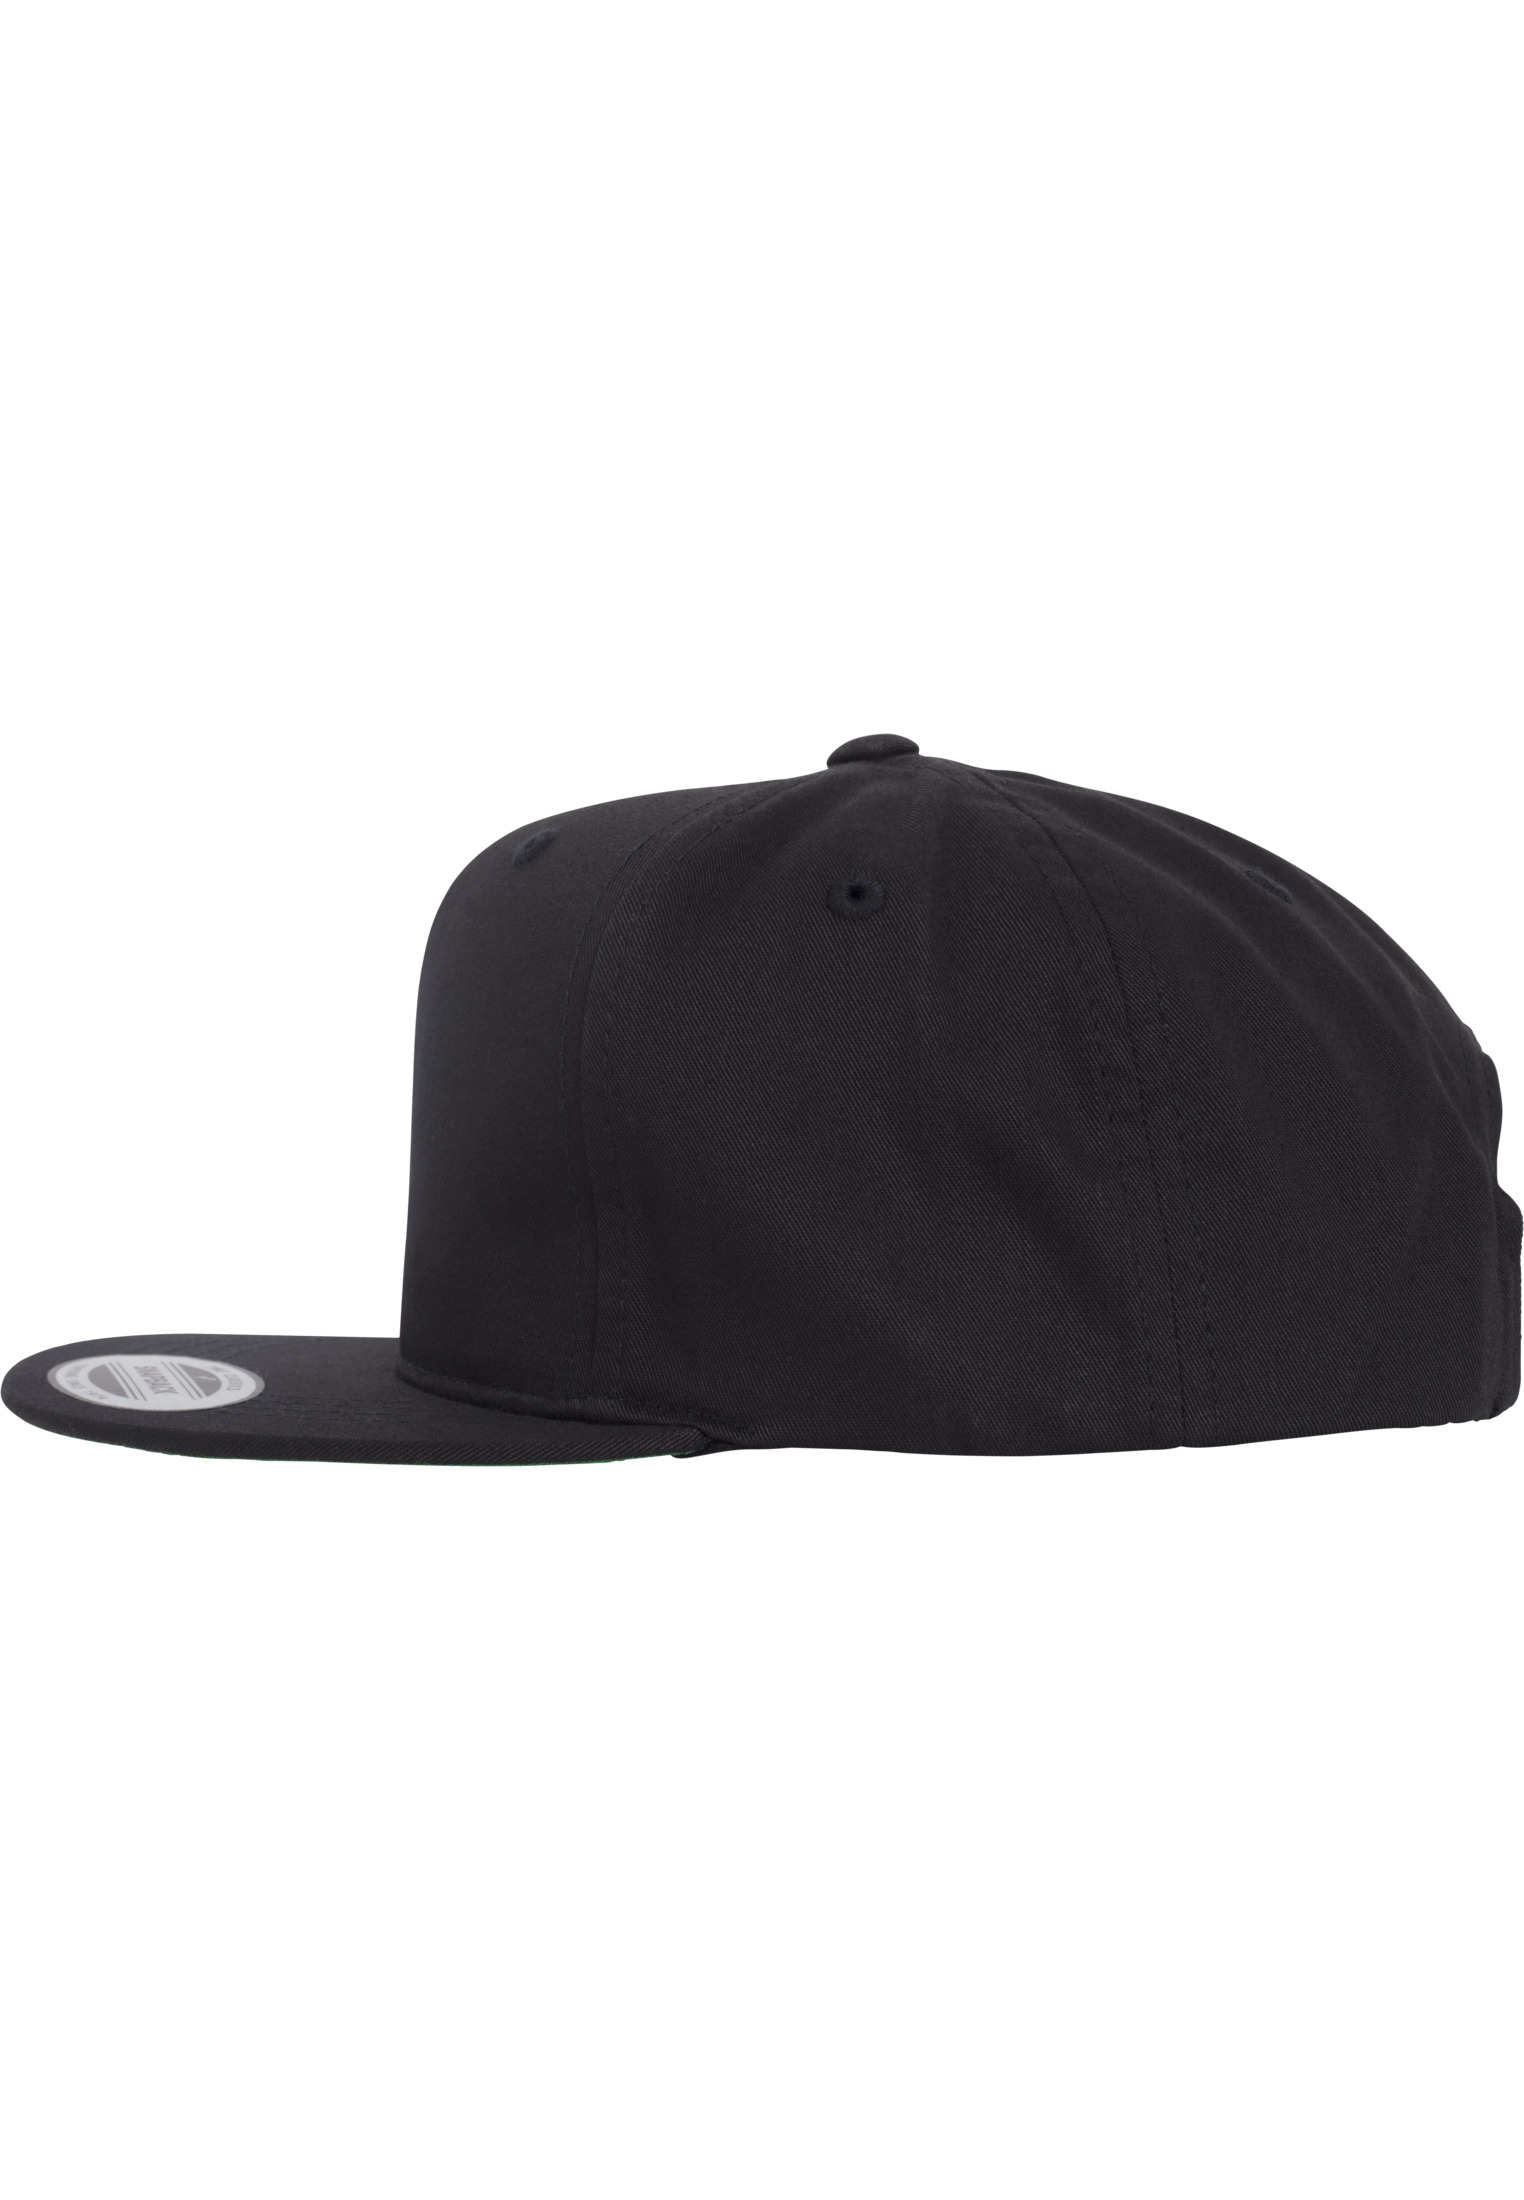 Kids Pro-Style Twill Snapback Youth Cap in Farbe black